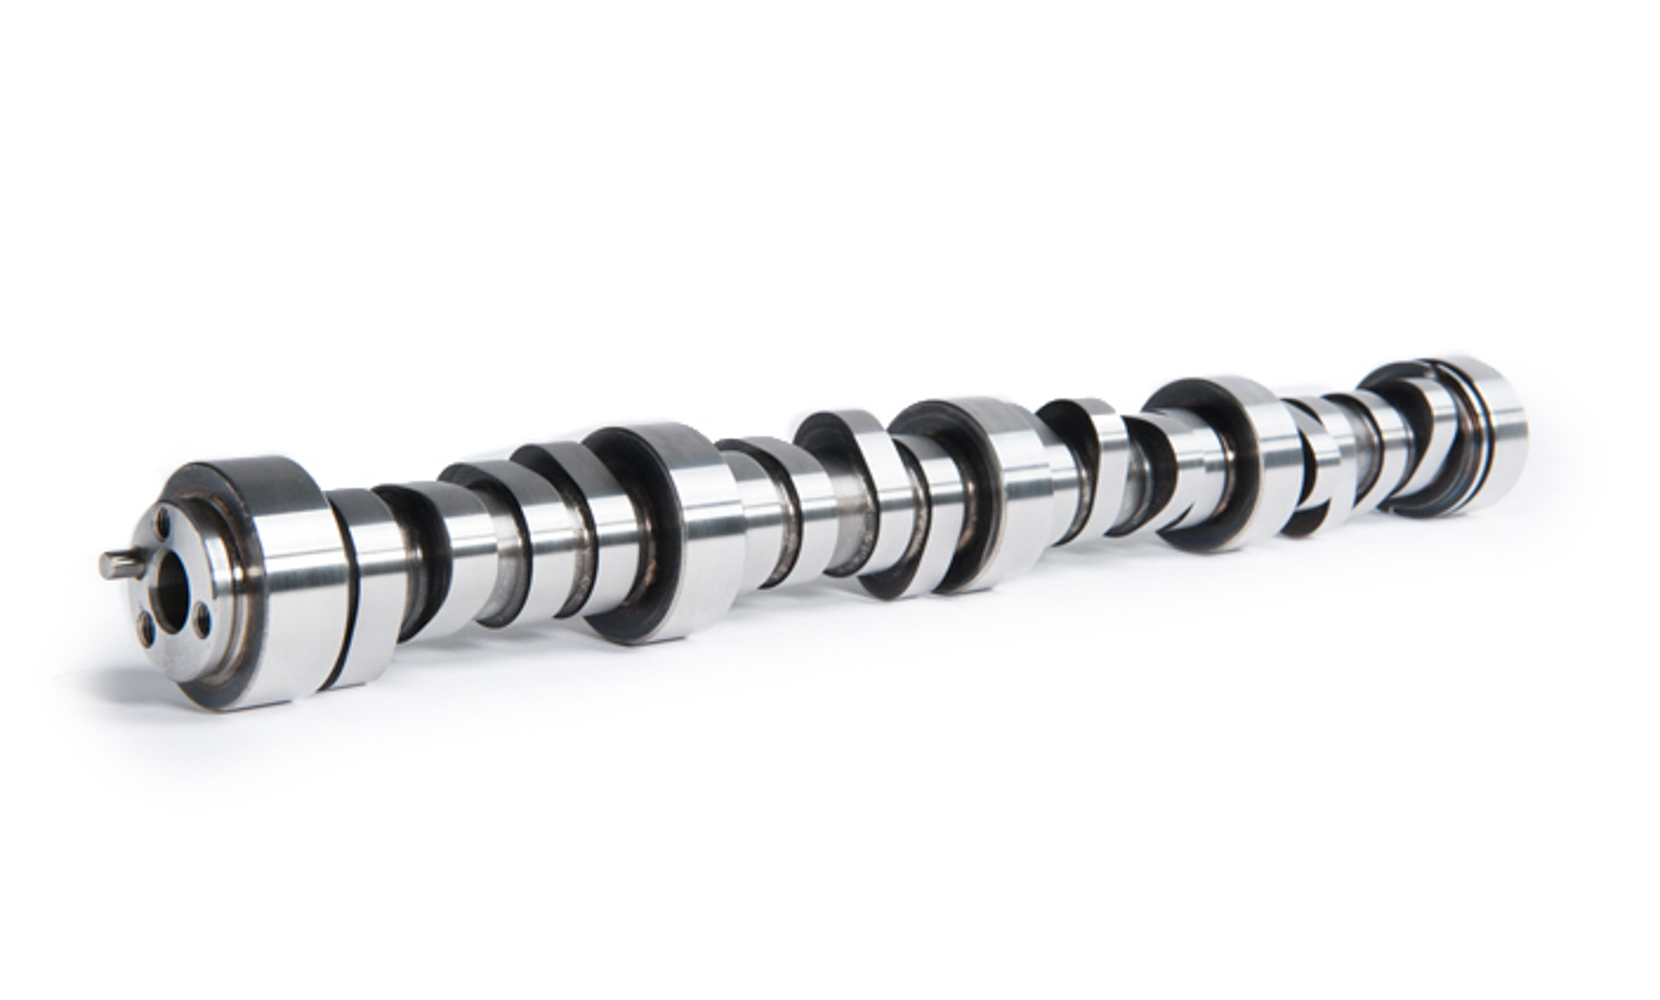 Cam Motion 03-01-0107 Camshaft, Hydraulic Roller, Lift 0.553 / 0.553 in, Duration 204 / 212, 116 LSA, GM LS-Series, Each